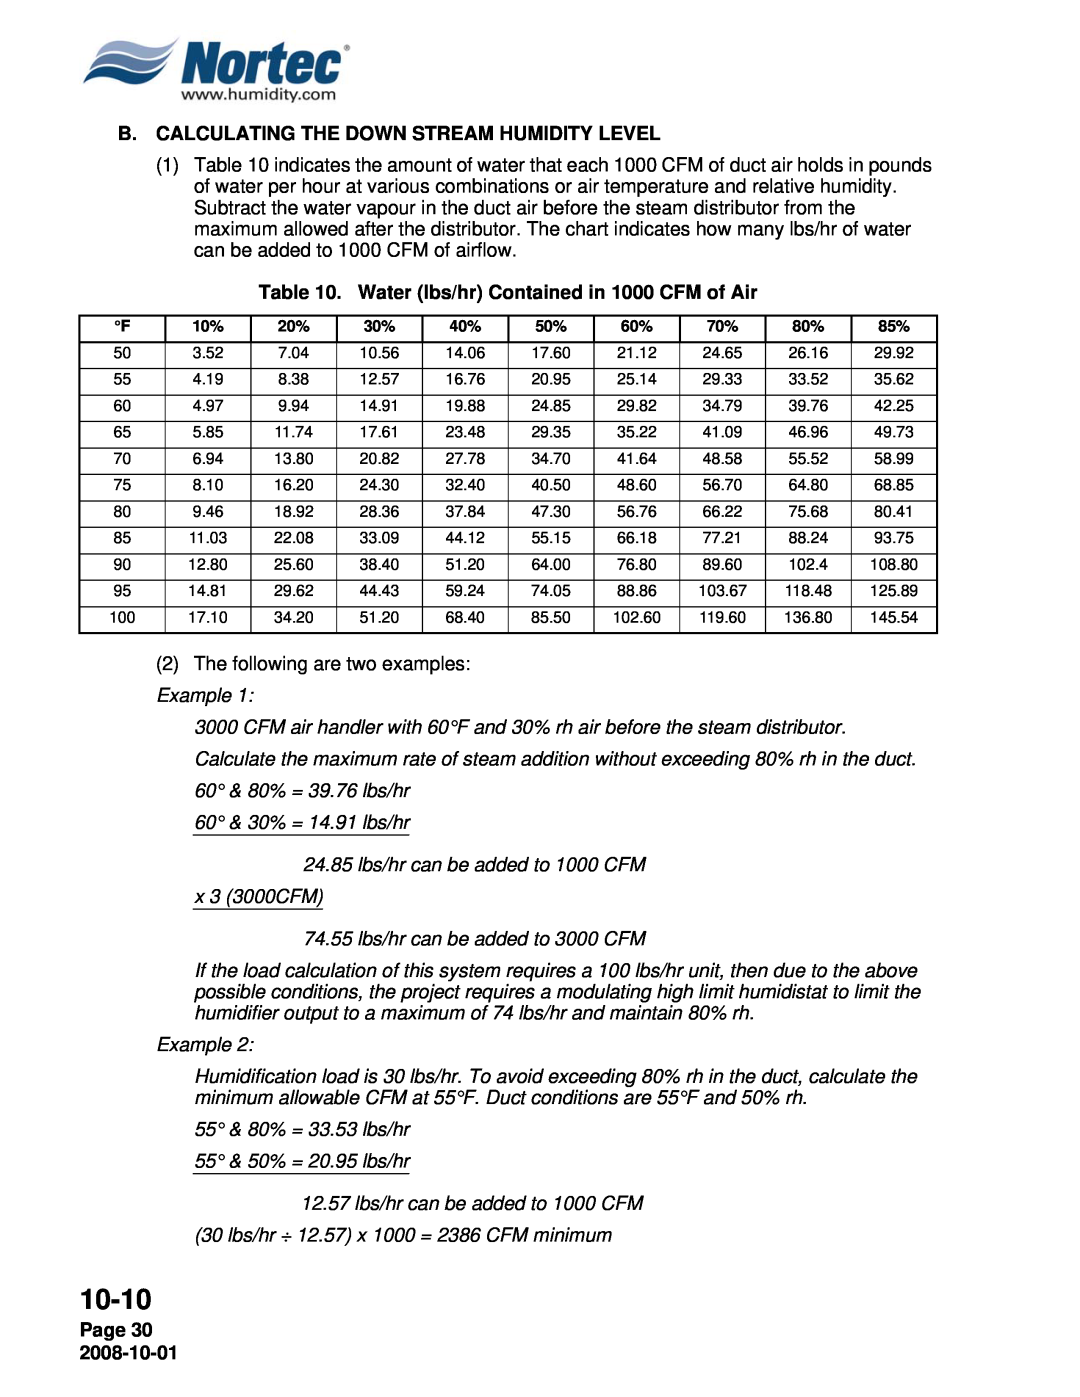 Nortec NHPC, NHTC 10-10, B.Calculating The Down Stream Humidity Level, 2The following are two examples: Example, Page 30 